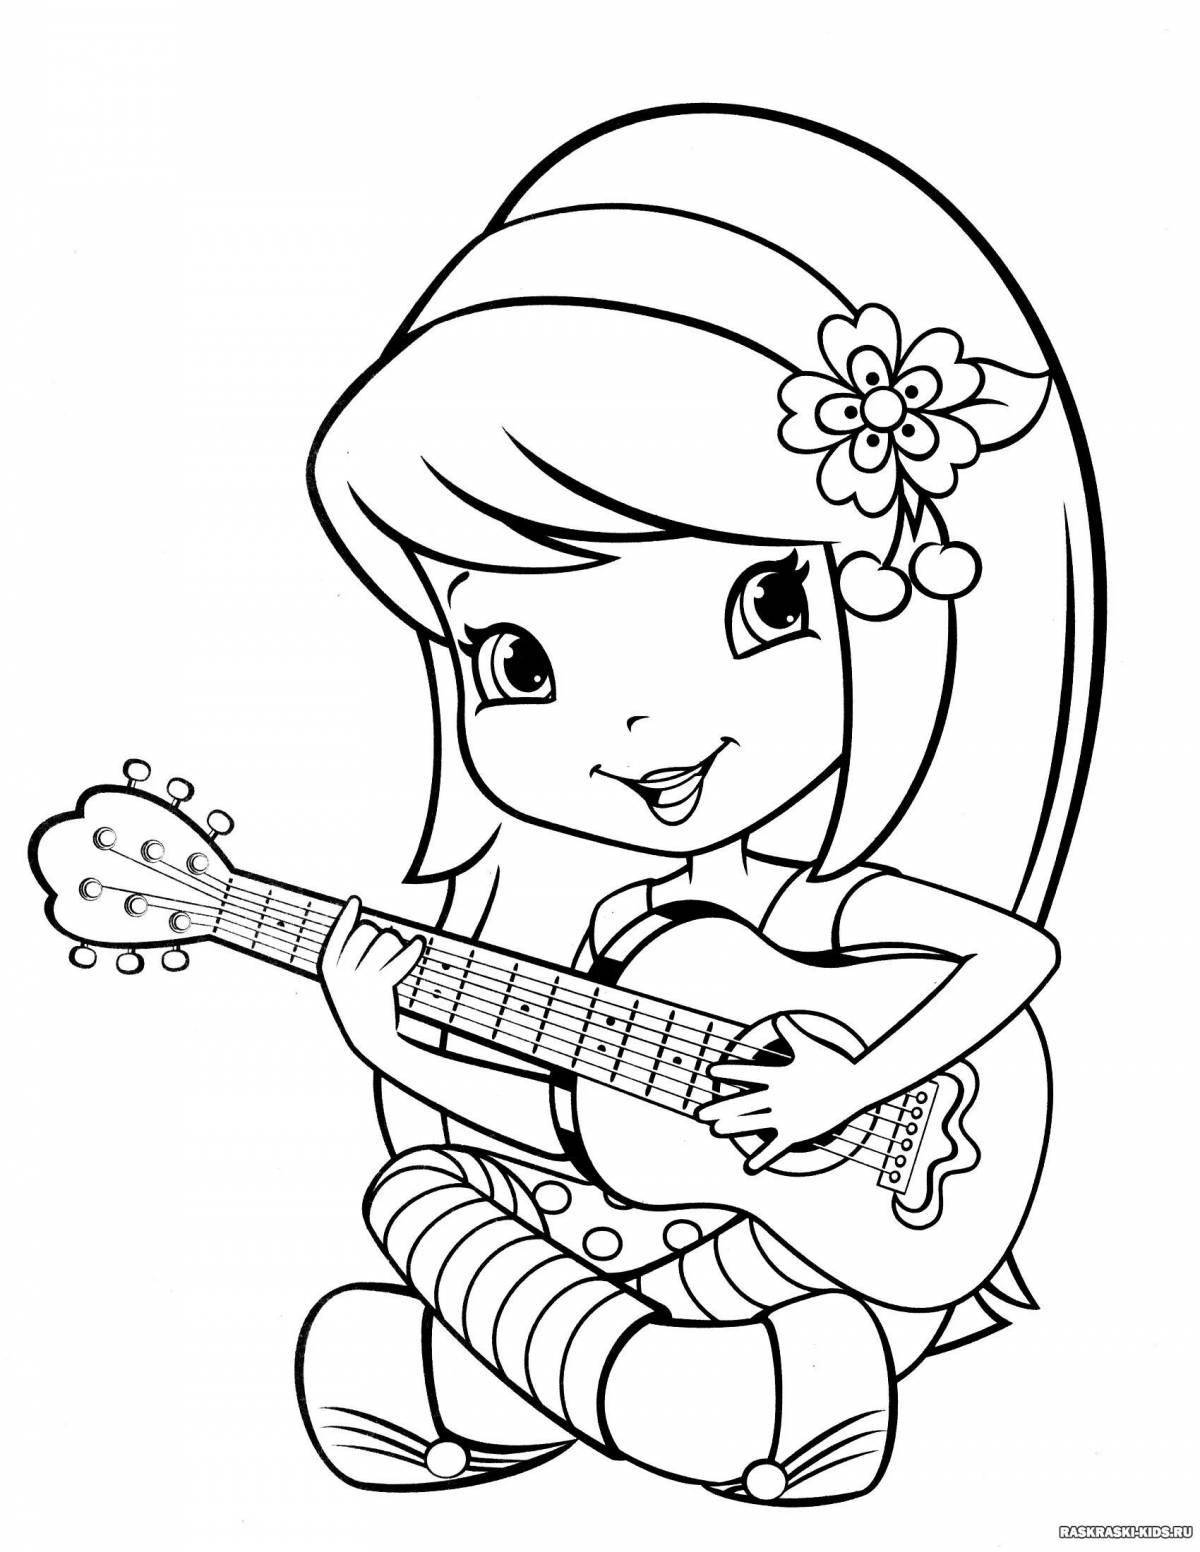 Color-frenzy coloring pages for girls